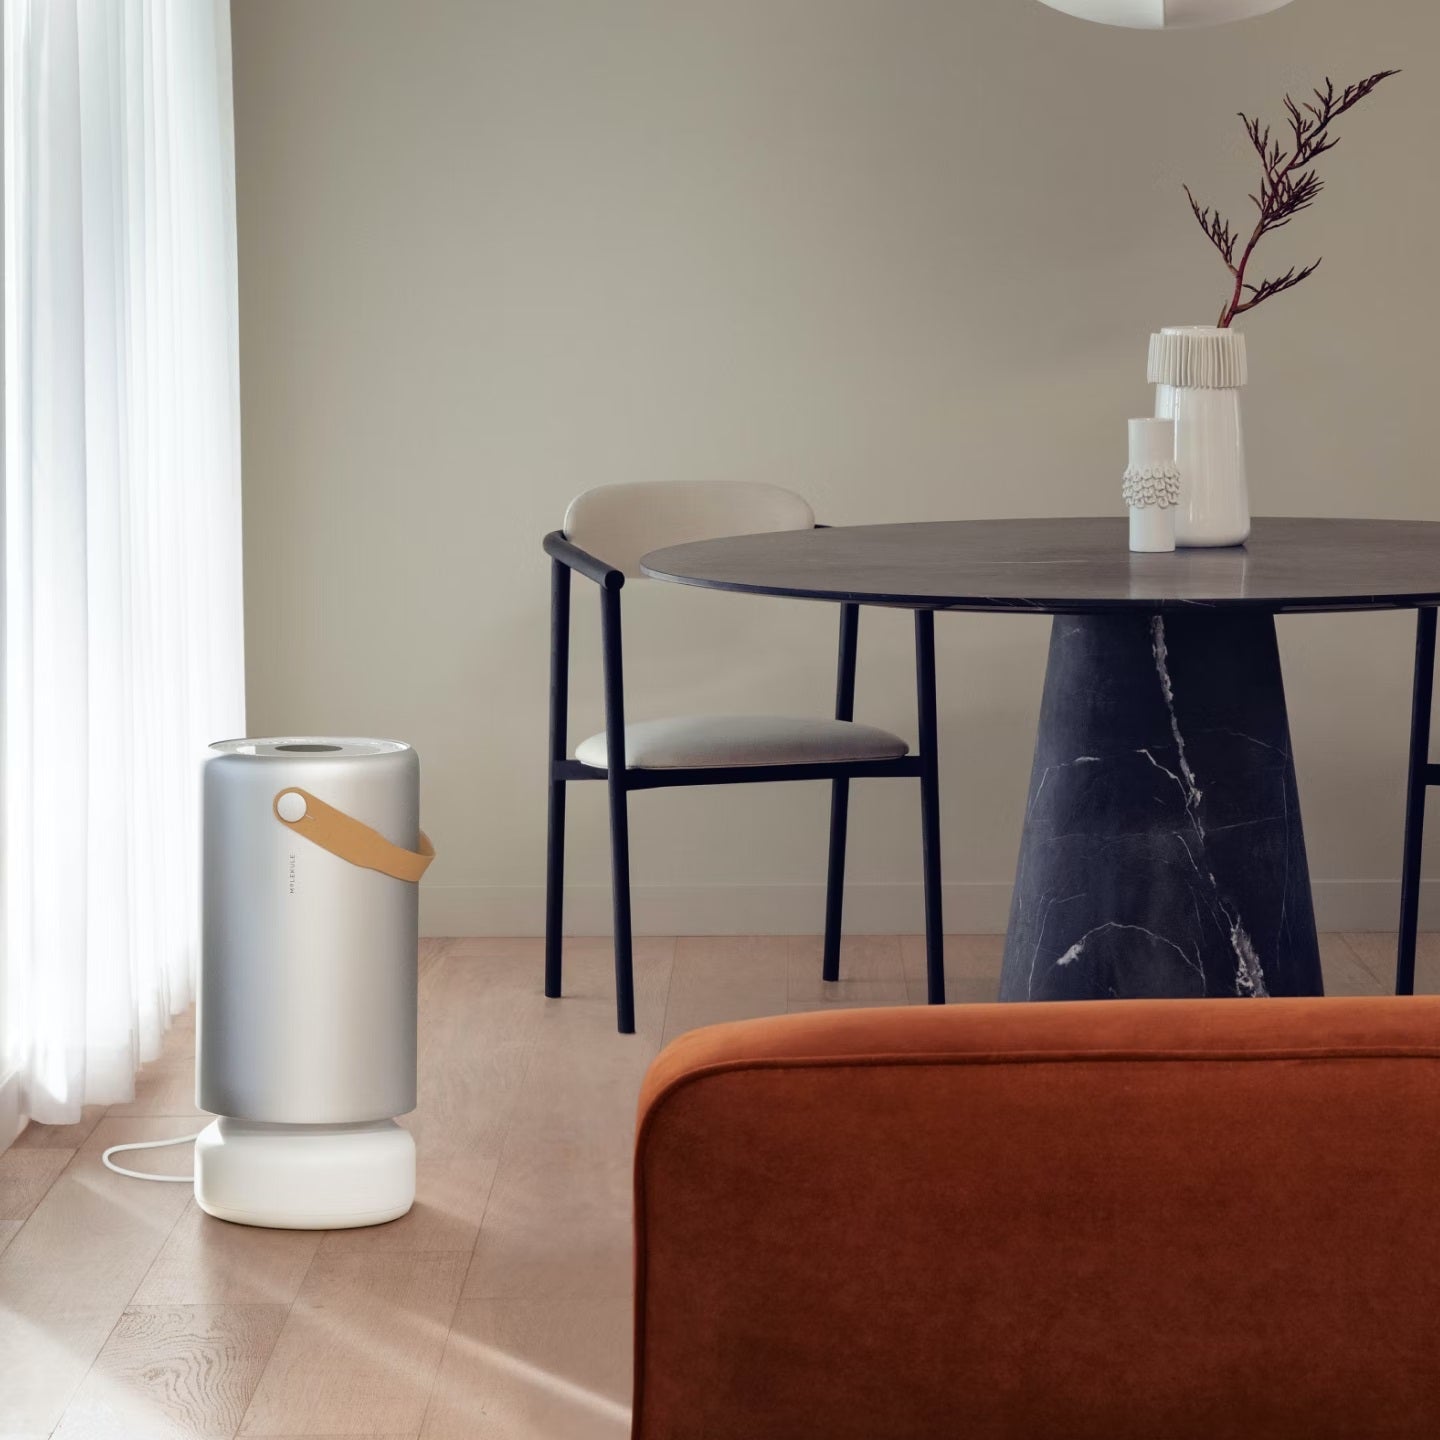 Molekule Air Pro air purifier on the floor next to dining room table